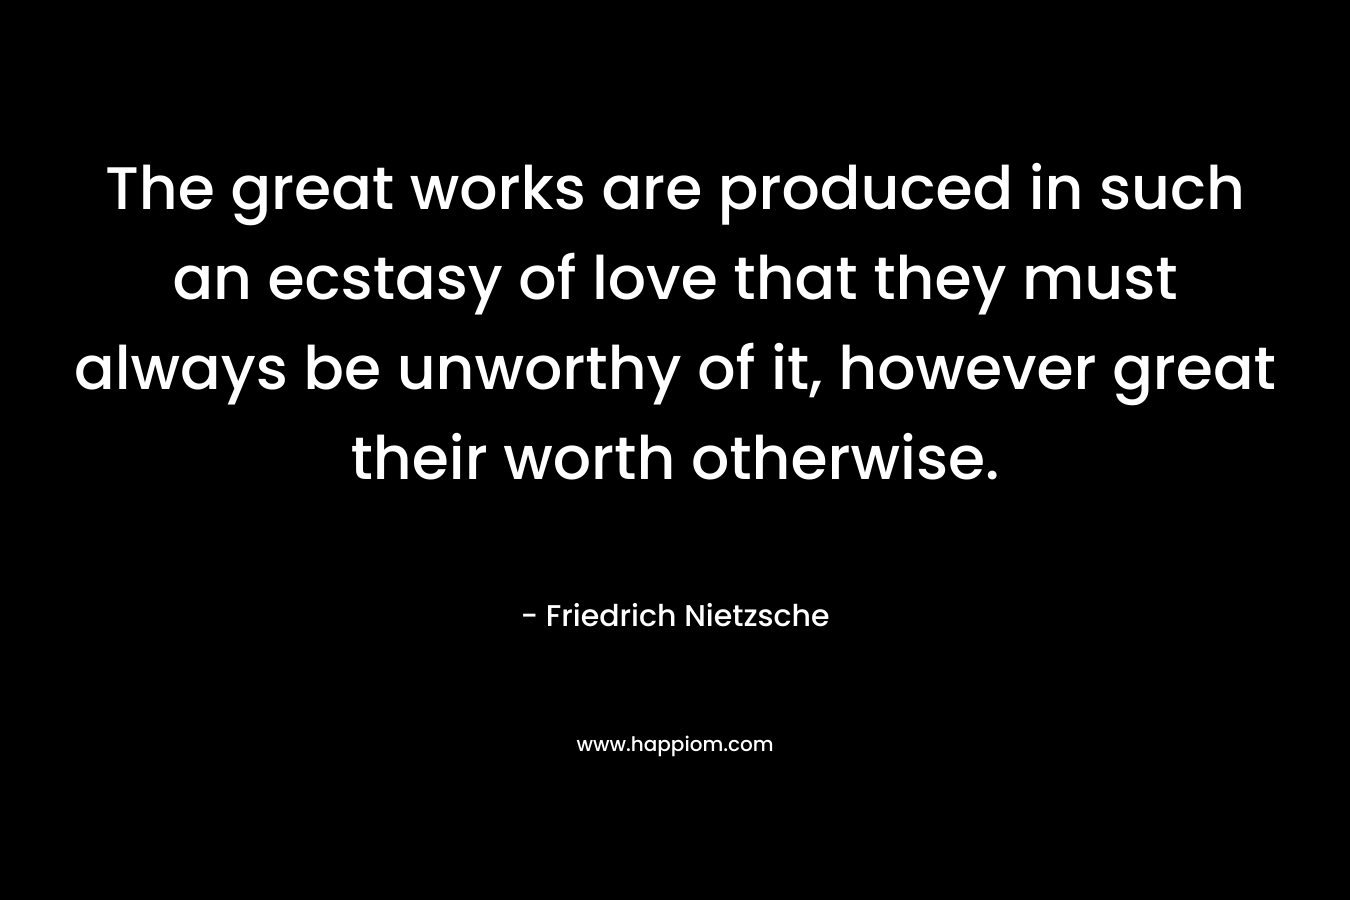 The great works are produced in such an ecstasy of love that they must always be unworthy of it, however great their worth otherwise. – Friedrich Nietzsche